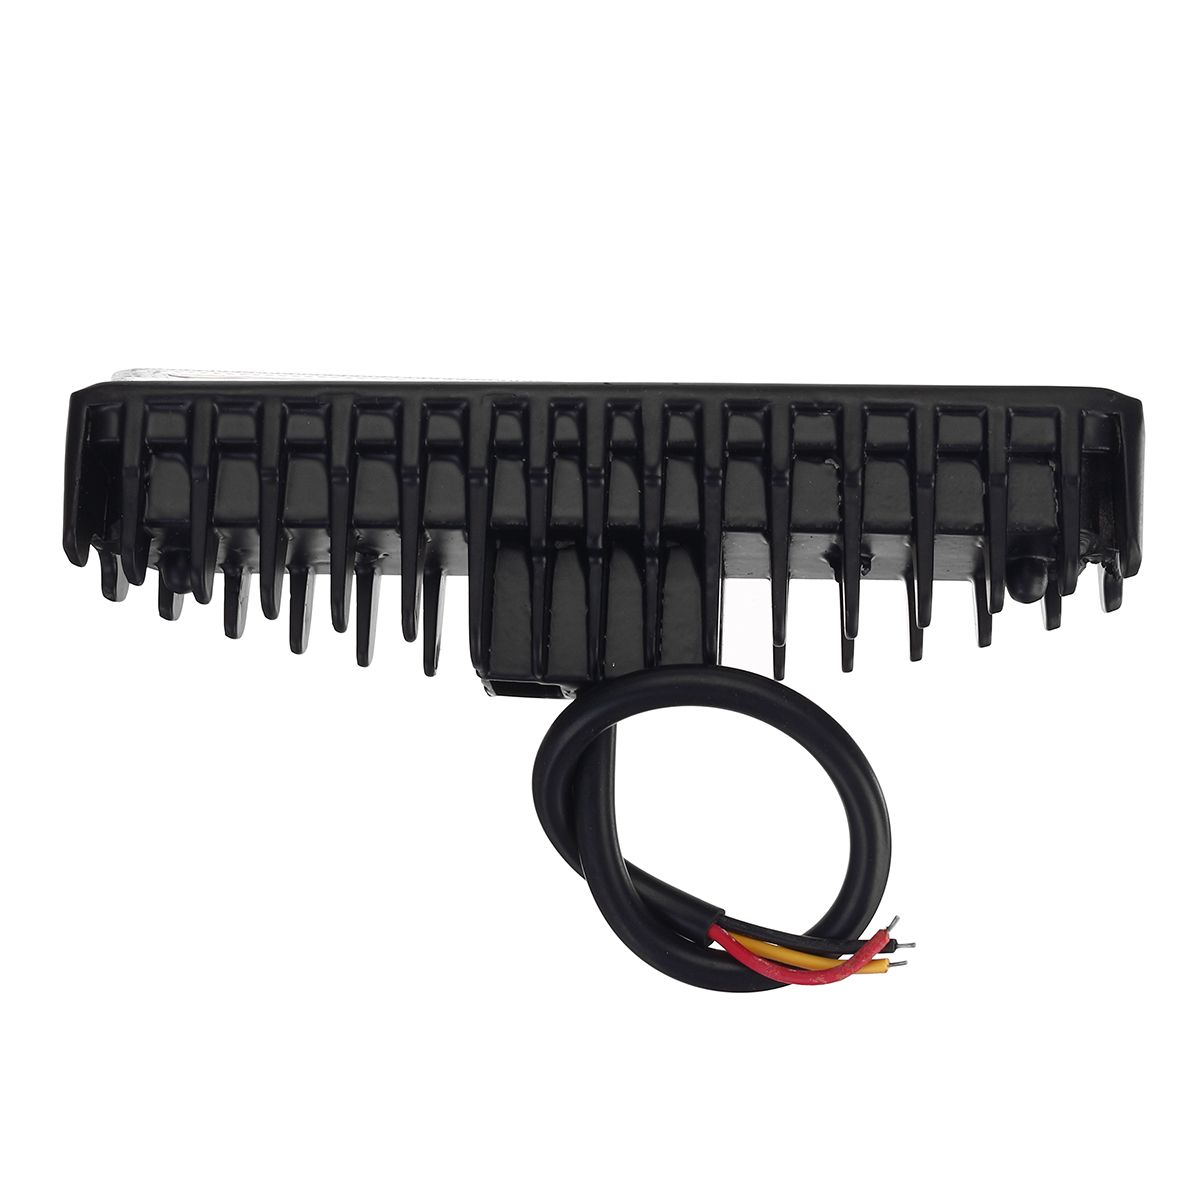 72W-Double-Row-LED-Work-Light-Bar-Fog-Light-9-32V-for-Motocycle-Offroad-Tractors-Trucks-Cars-1687485